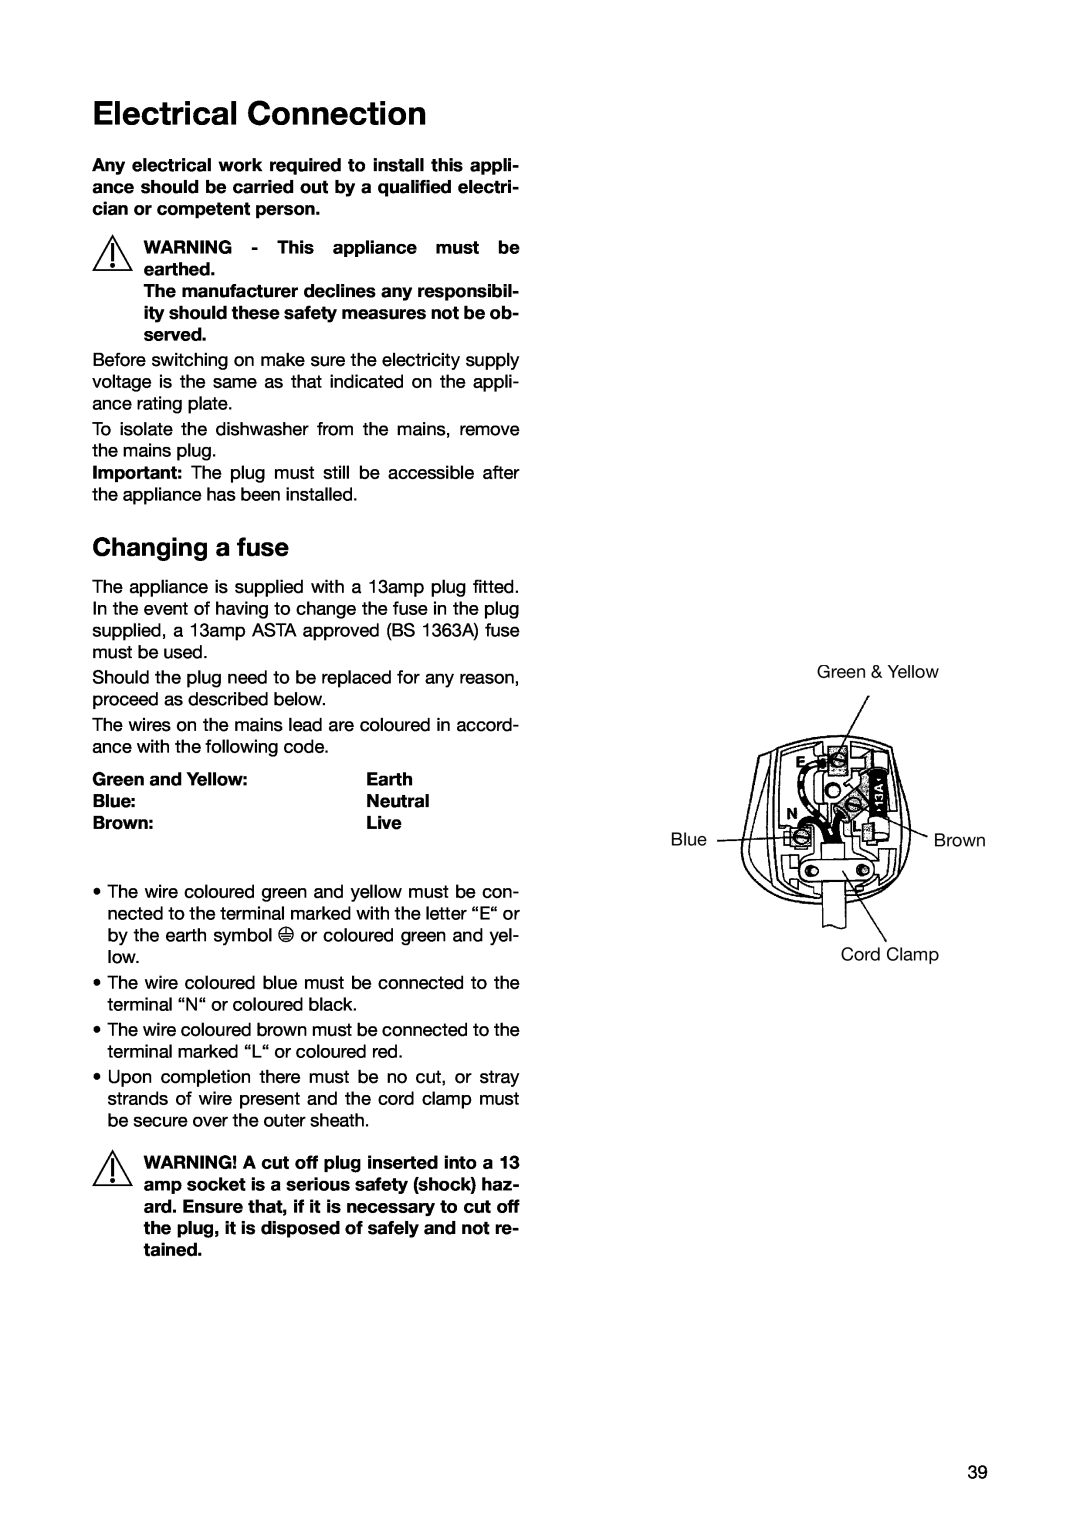 Zanussi ZSF 6171 manual Electrical Connection, Changing a fuse 